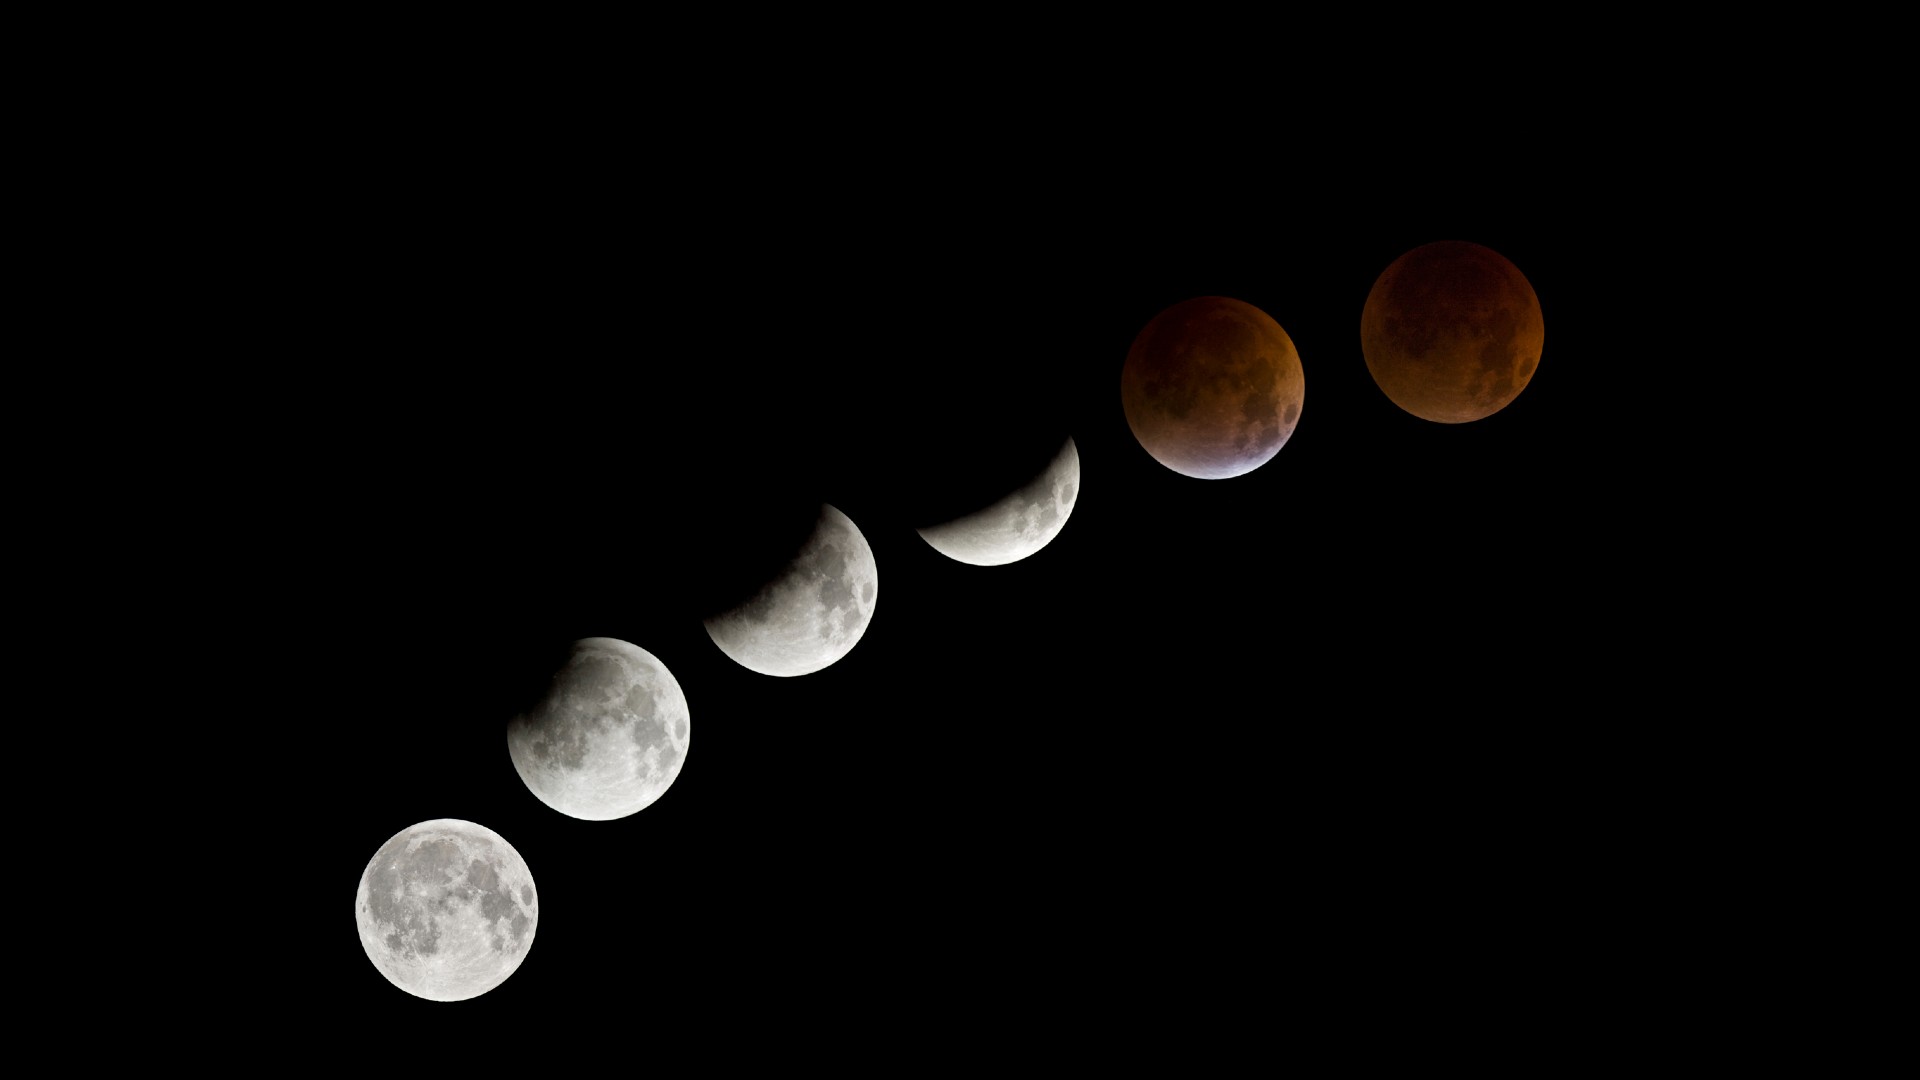 A time lapse of a total lunar eclipse.